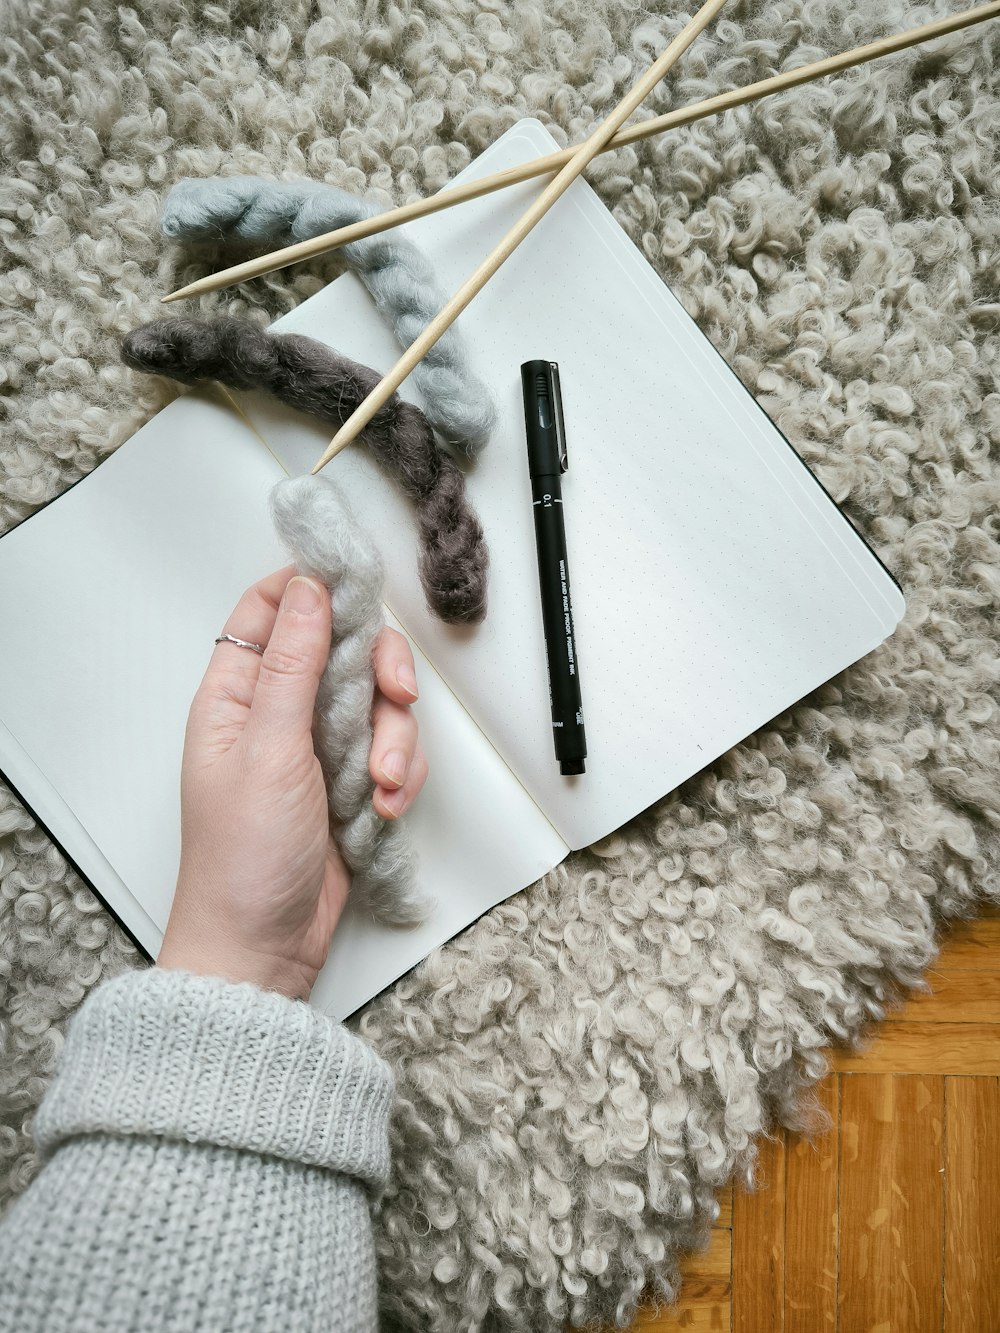 a person is knitting on a piece of paper